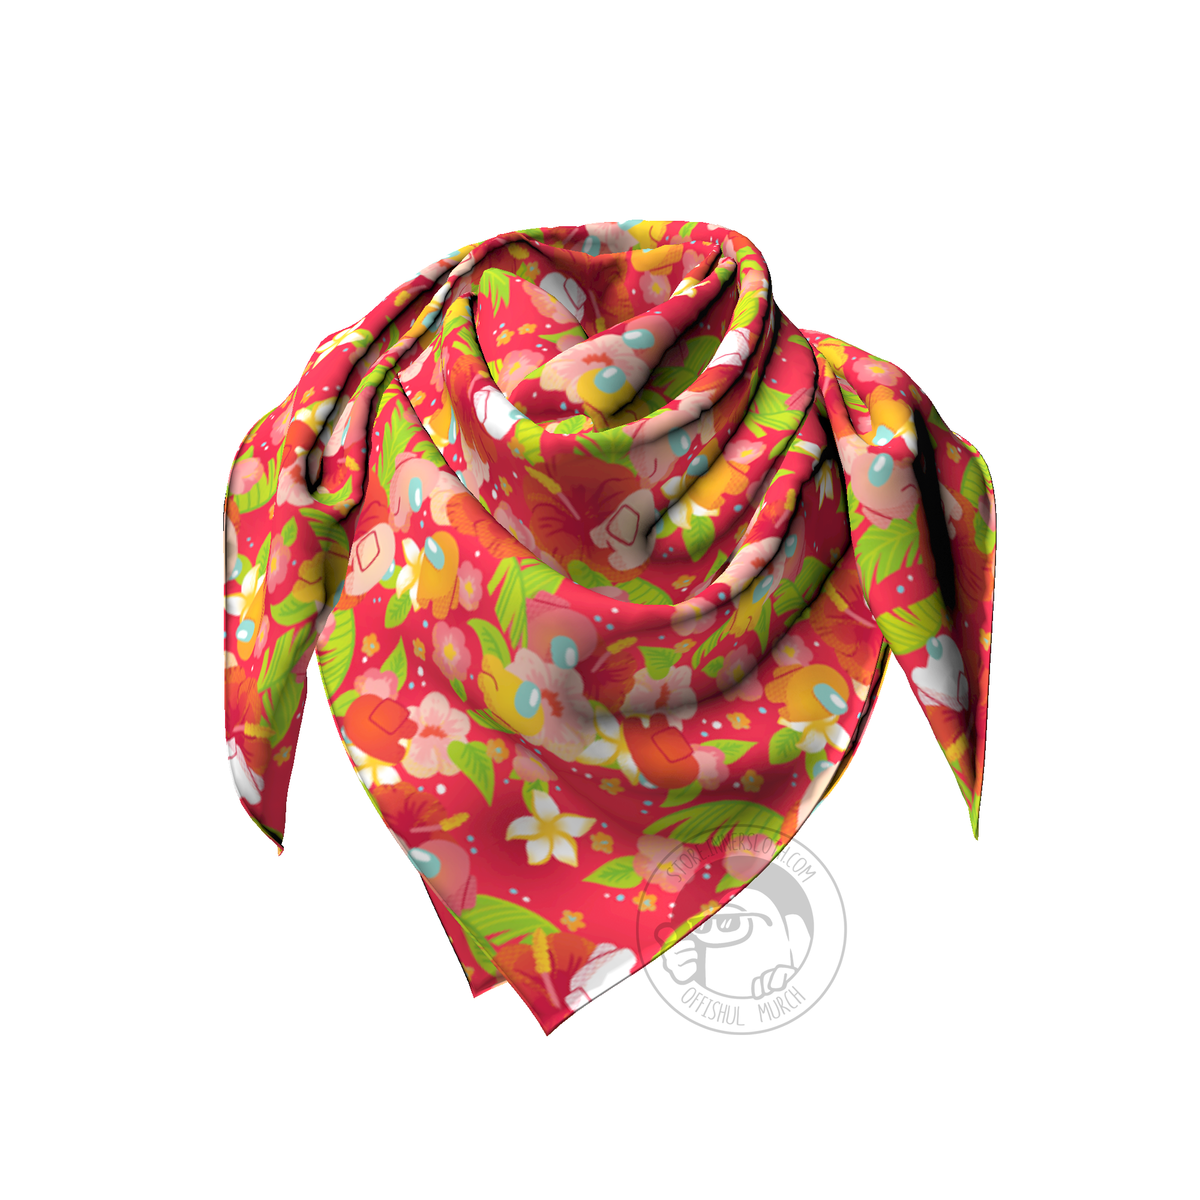 A product photo of the Among Us: Tropical Crewmate Scarf in red. The print is tropical leaves with yellow, orange, red, and coral crewmates throughout, interacting with hibiscus flowers.